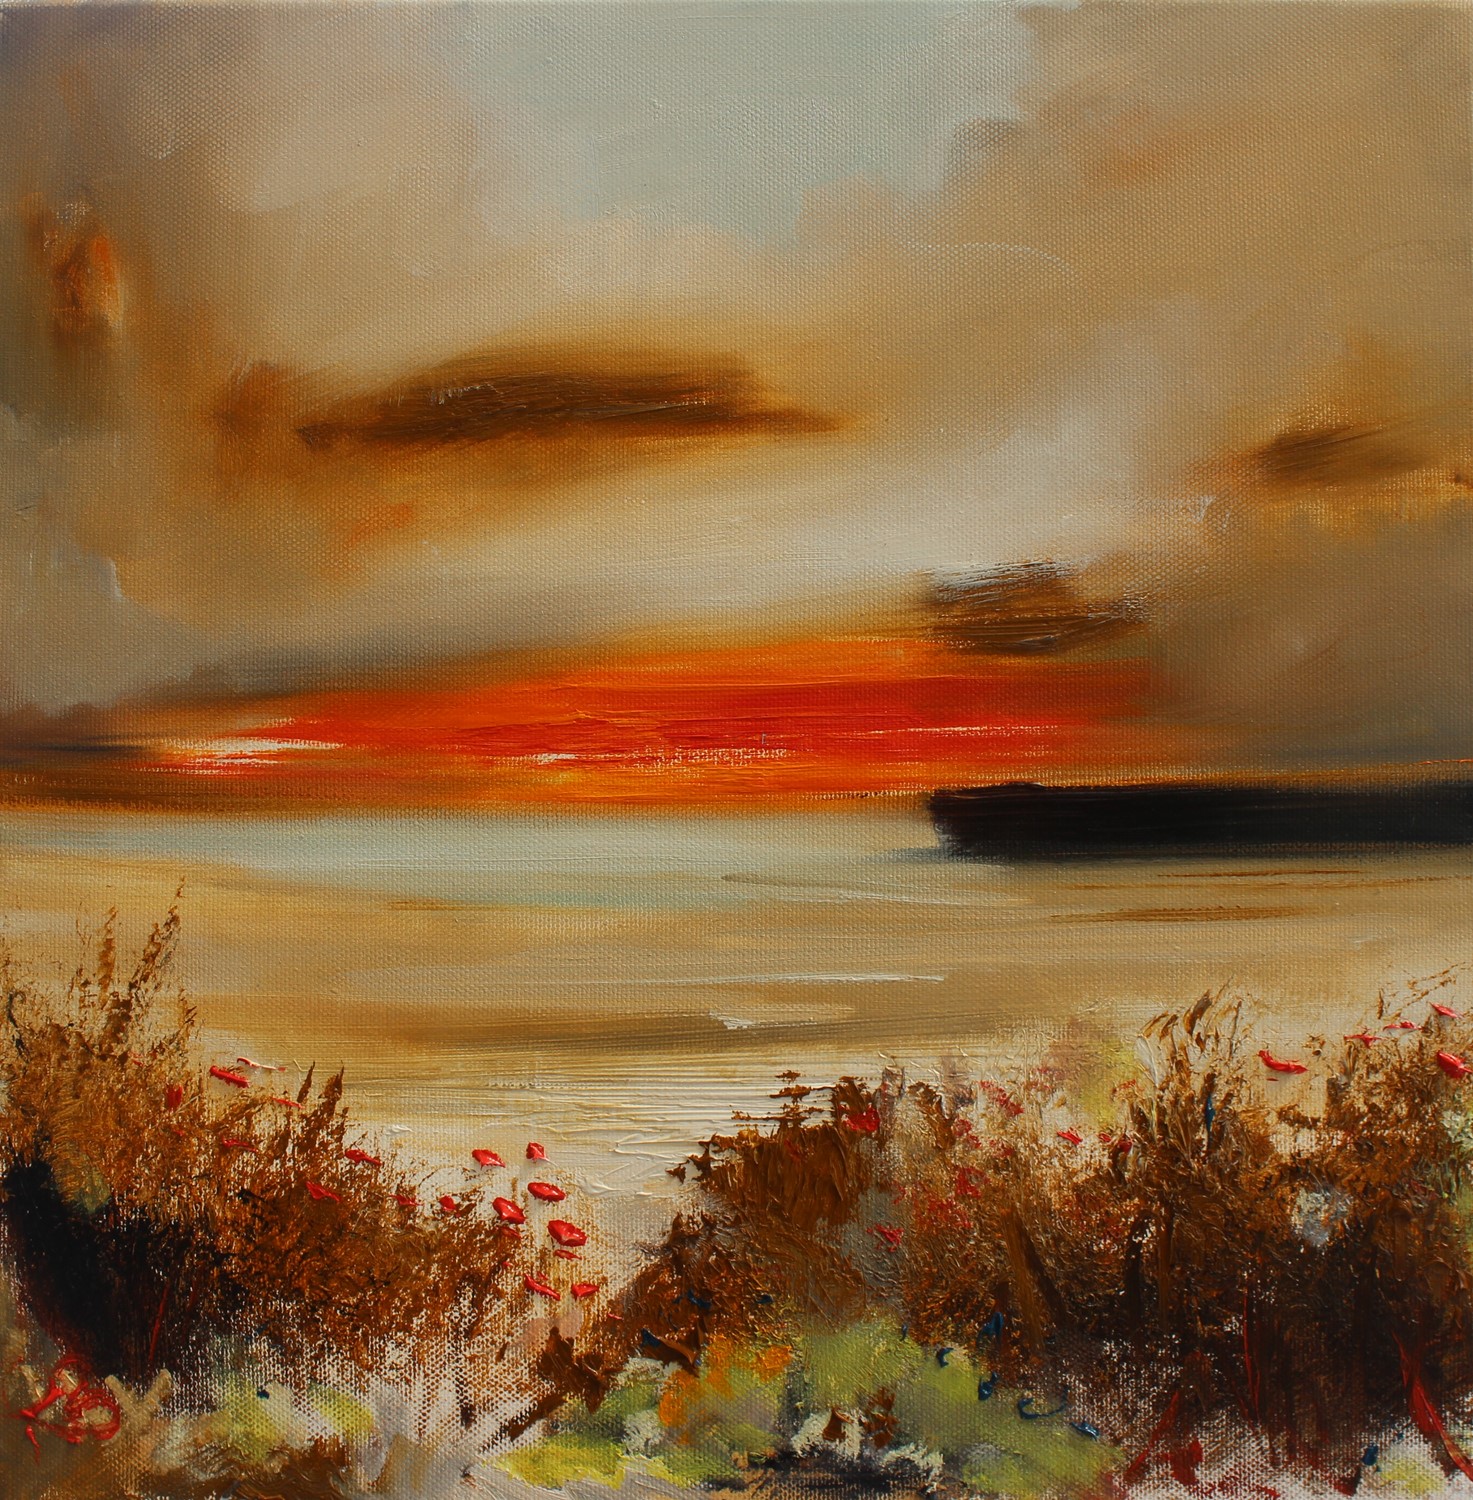 'Headed down to the Bat at Sunset' by artist Rosanne Barr